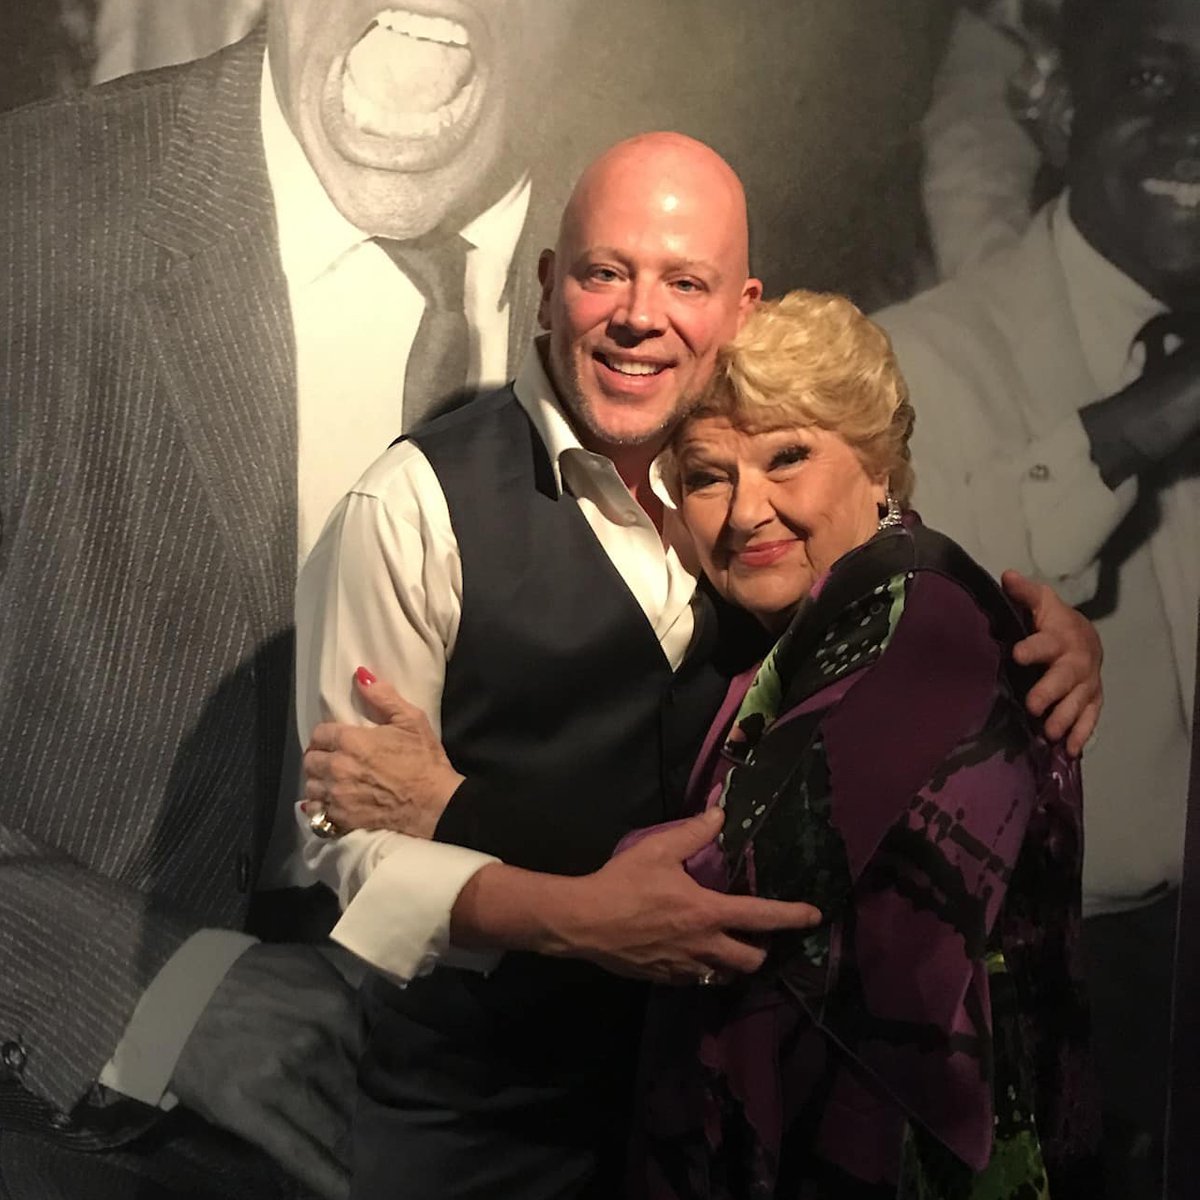 Returning to the Purple Room May 10 & 11 is the #MarilynMaye! (@realmarilynmaye) The toast of NY's jazz & cabaret scene, Marilyn’s riding high from rave reviews of herCarnegie Hall performance with the #NewYorkPops! purpleroompalmsprings.com/tickets

#marilynmaye #purpleroom #PalmSprings